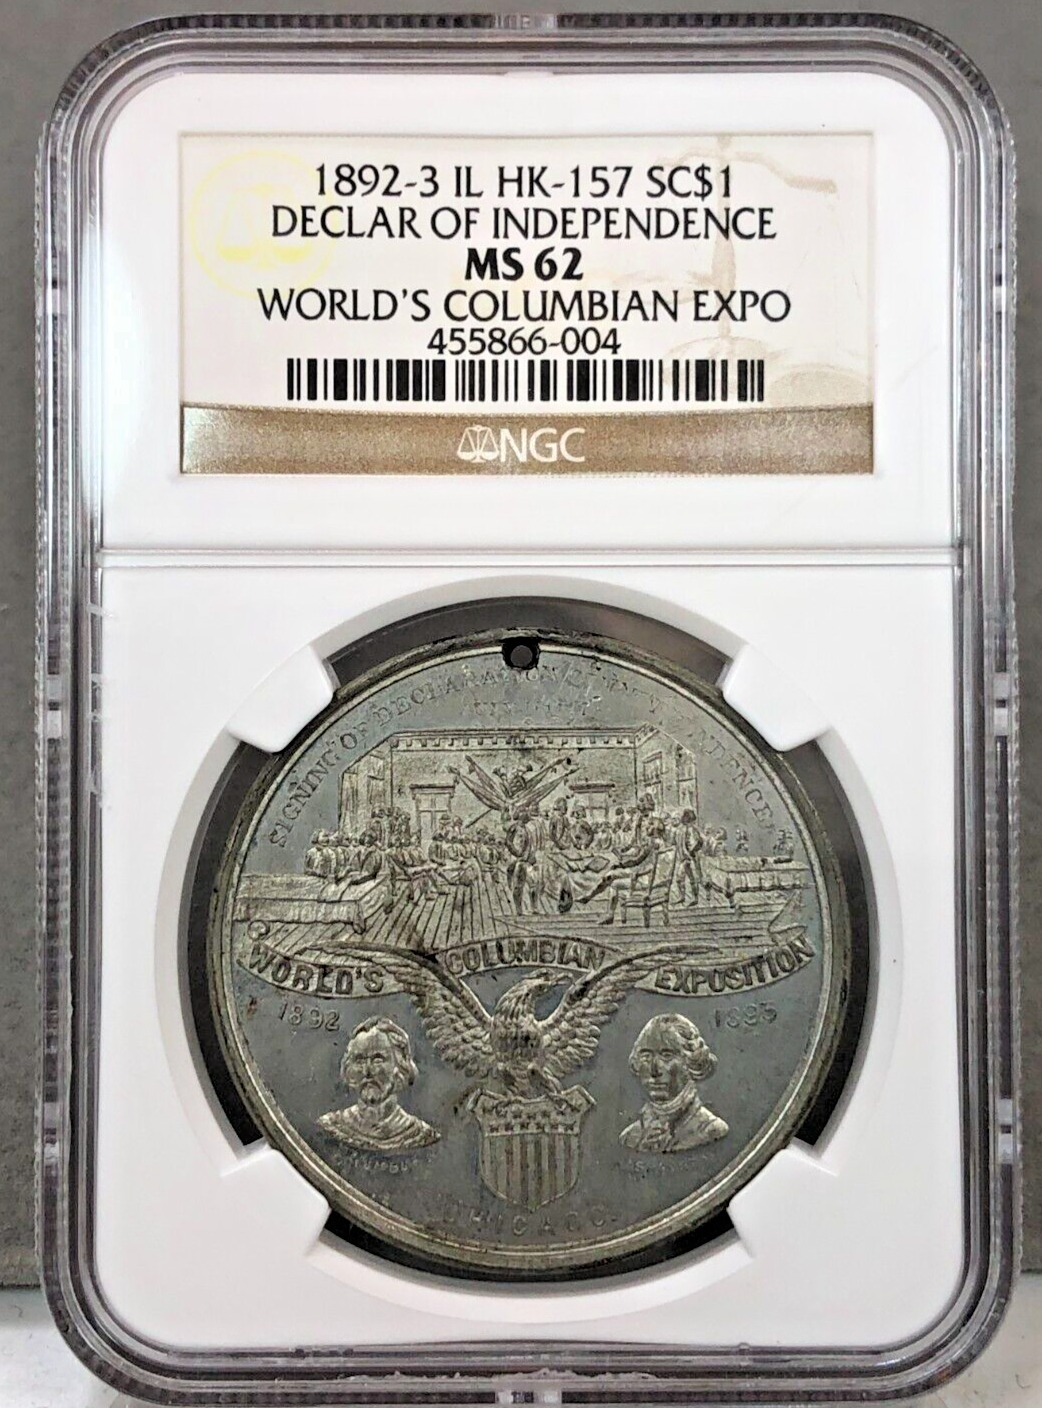 1892-3 IL HK-157 SC$1 Declaration Of Independence Worlds Columbian Expo NGC MS62